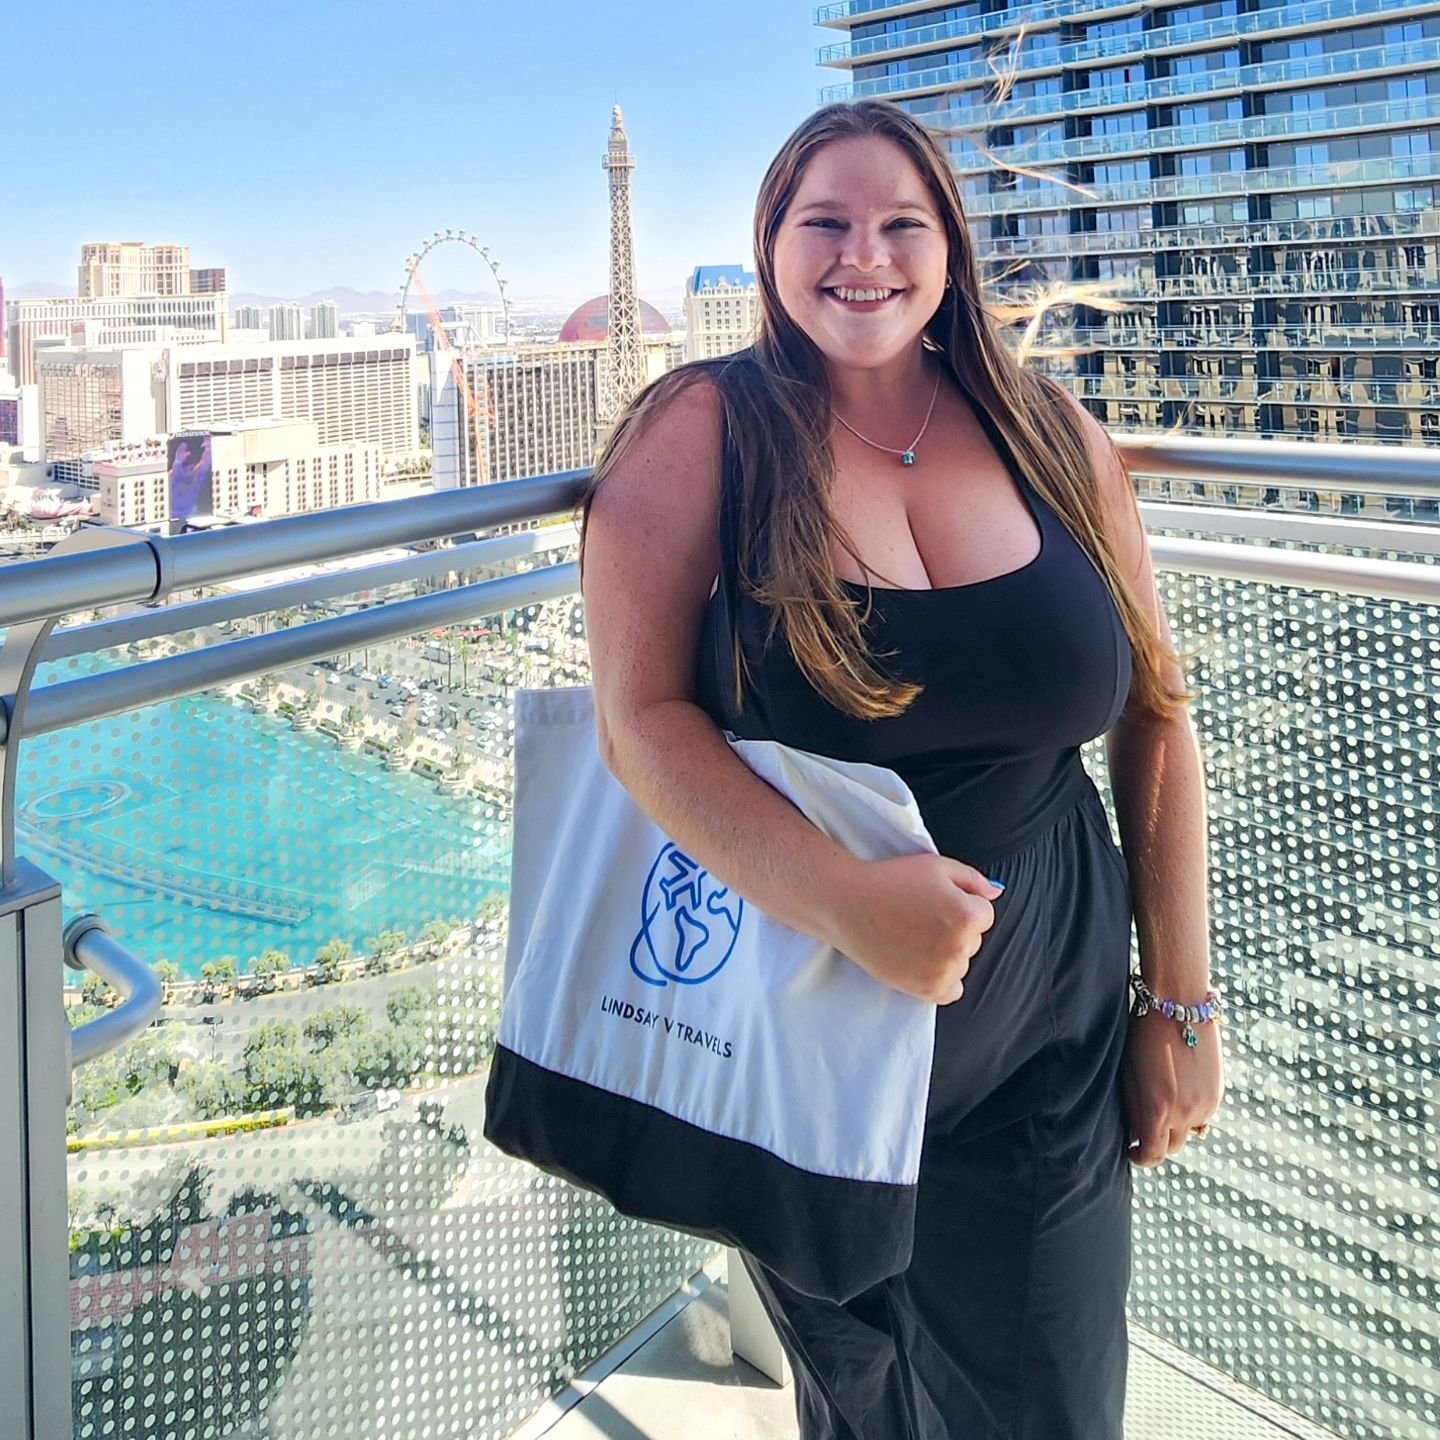 As we celebrate Global Travel Advisor Day, I'd like to reintroduce myself. My name is Lindsay V, and I reside in sunny Las Vegas with my wonderful husband. My passions include photography, spas, sports, history, and anything Disney. After many years 